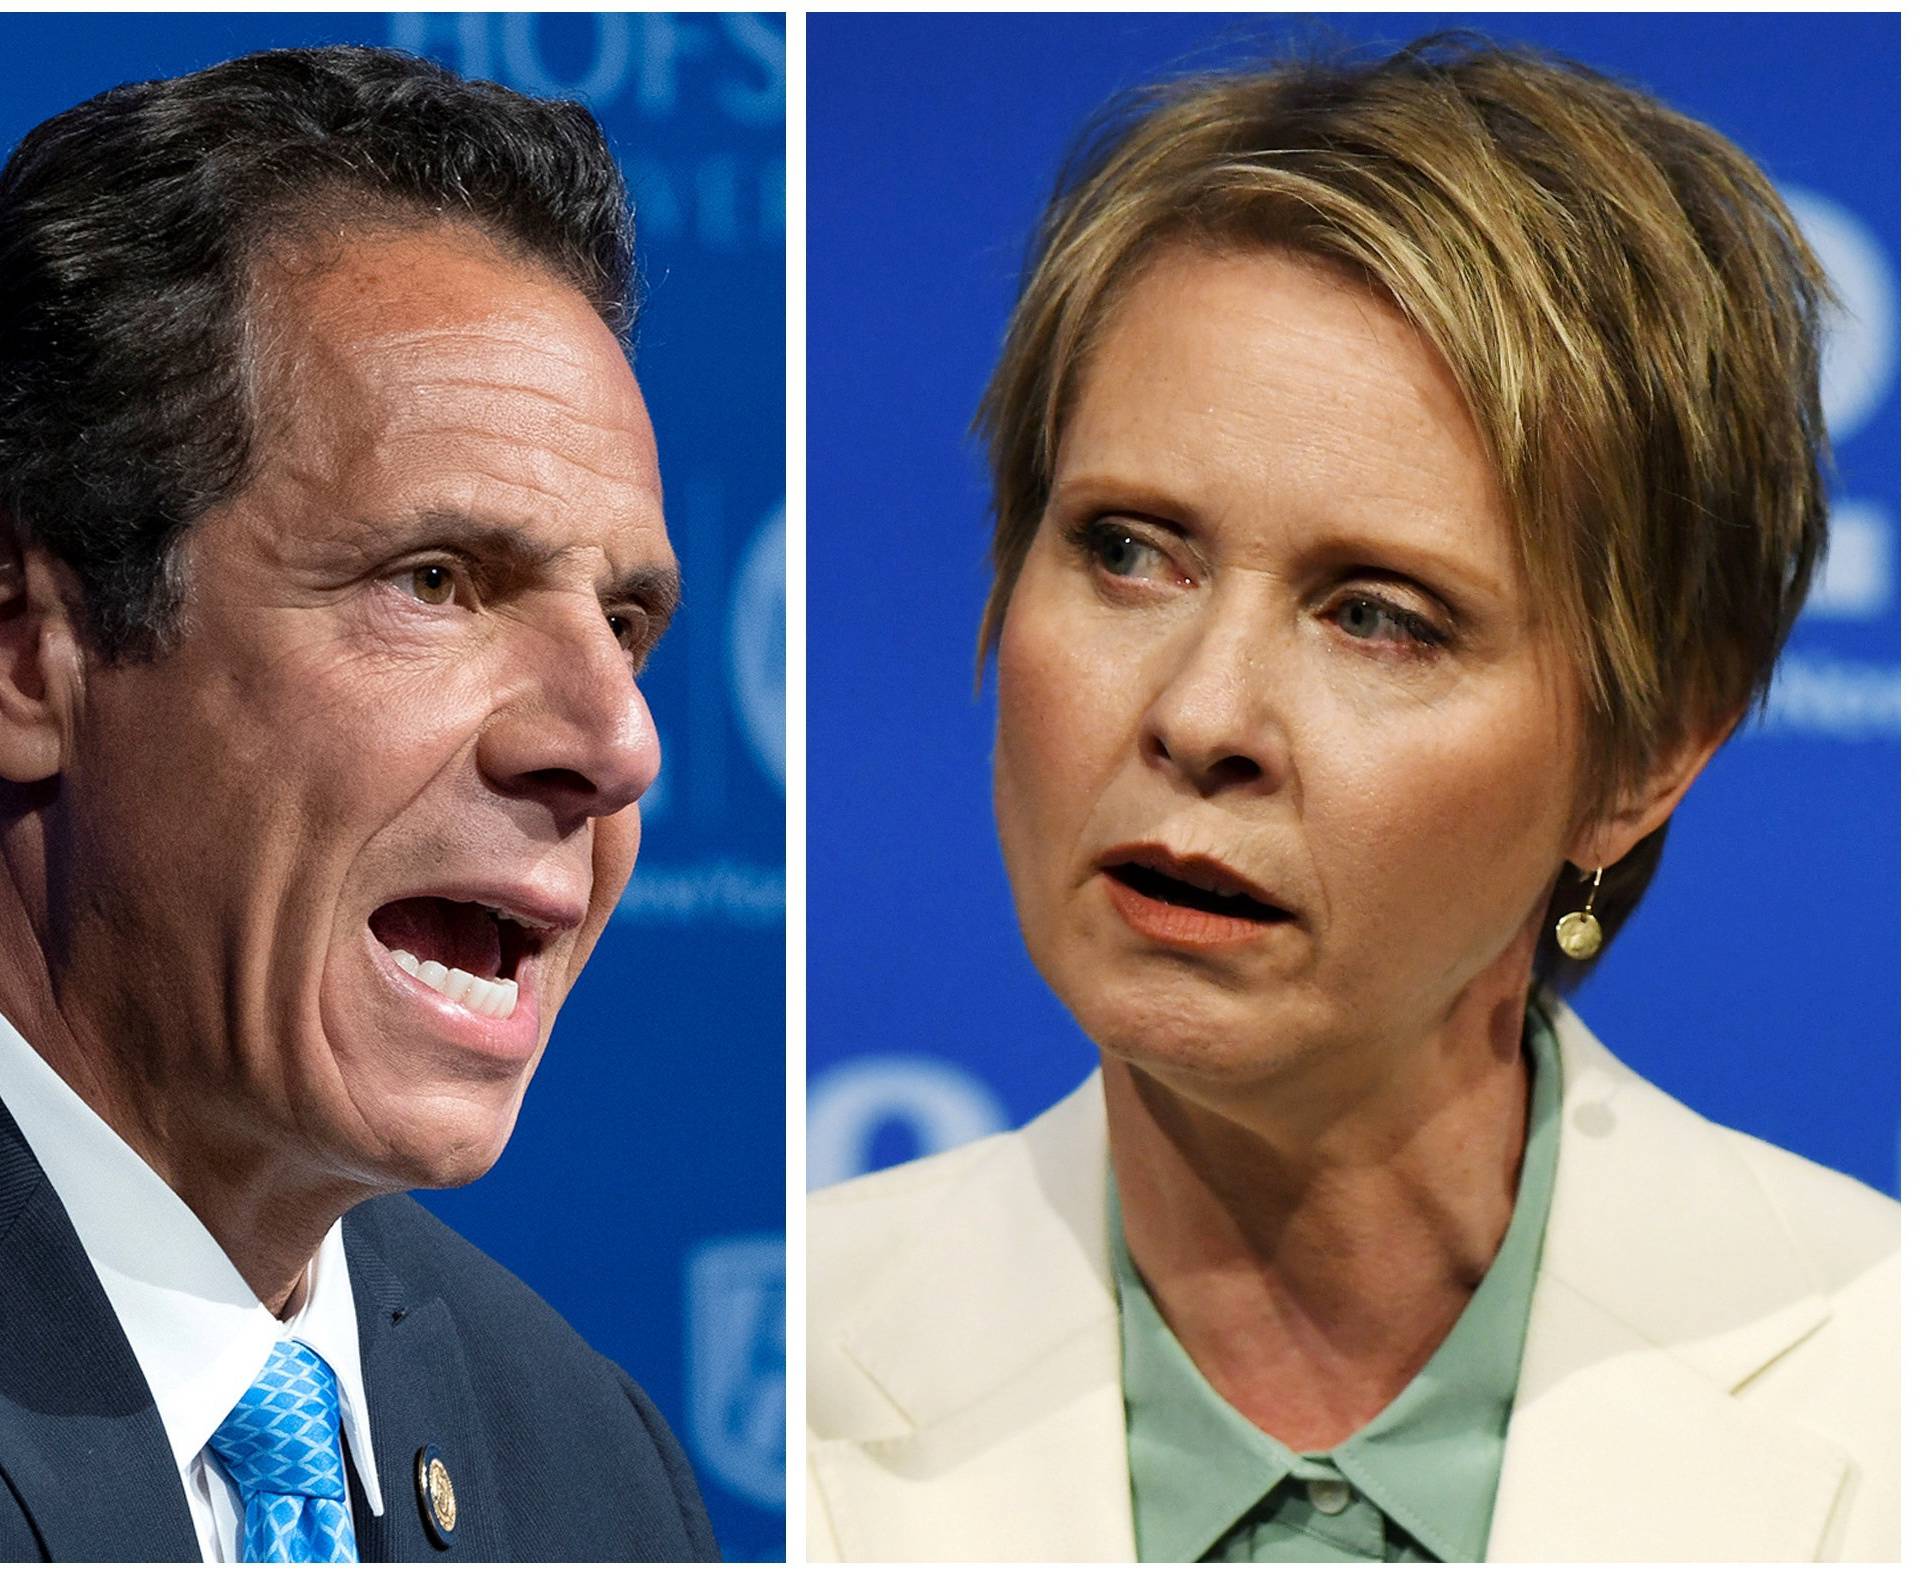 FILE PHOTO: A combination photo of Governor Andrew M. Cuomo and actress and activist Cynthia Nixon, a first-time candidate mounting a challenge, are shown during a televised debate in Hempstead, New York